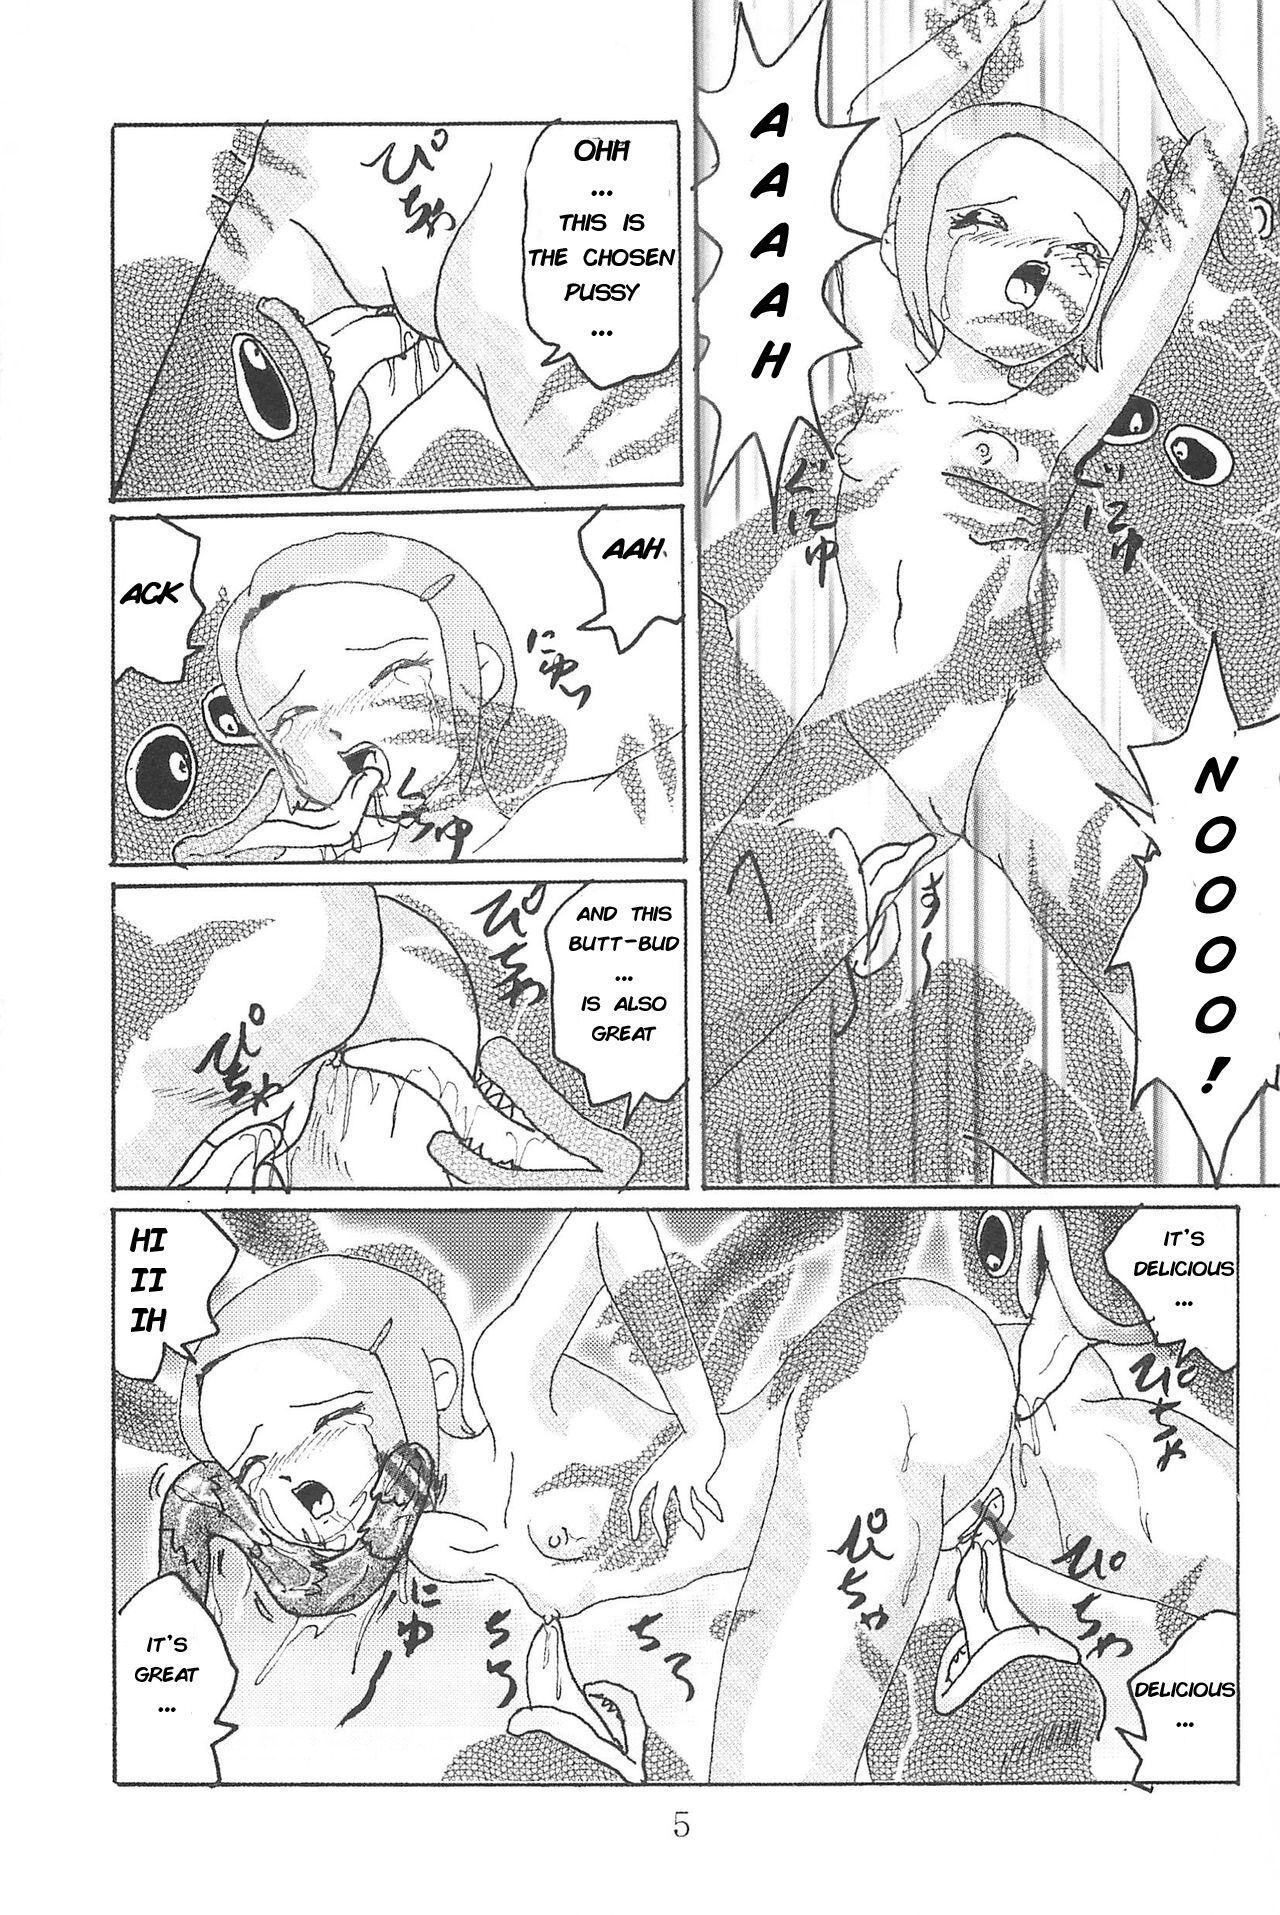 Face Fucking Blow Up 8 - Digimon adventure Pretty - Page 4